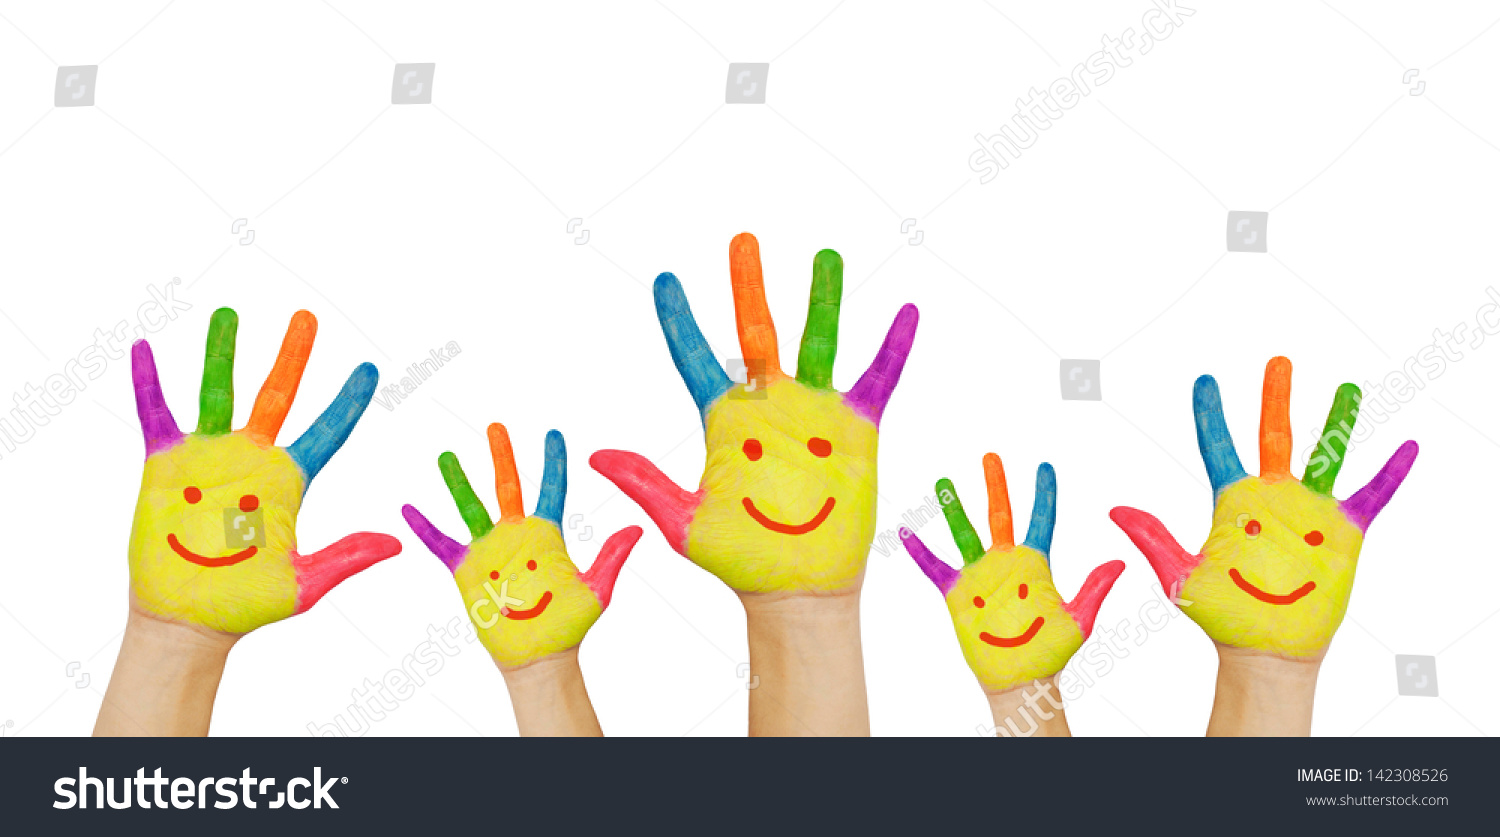 Children's smiling colorful hands raised up. The concept of classroom or back to school. Isolated on white background #142308526